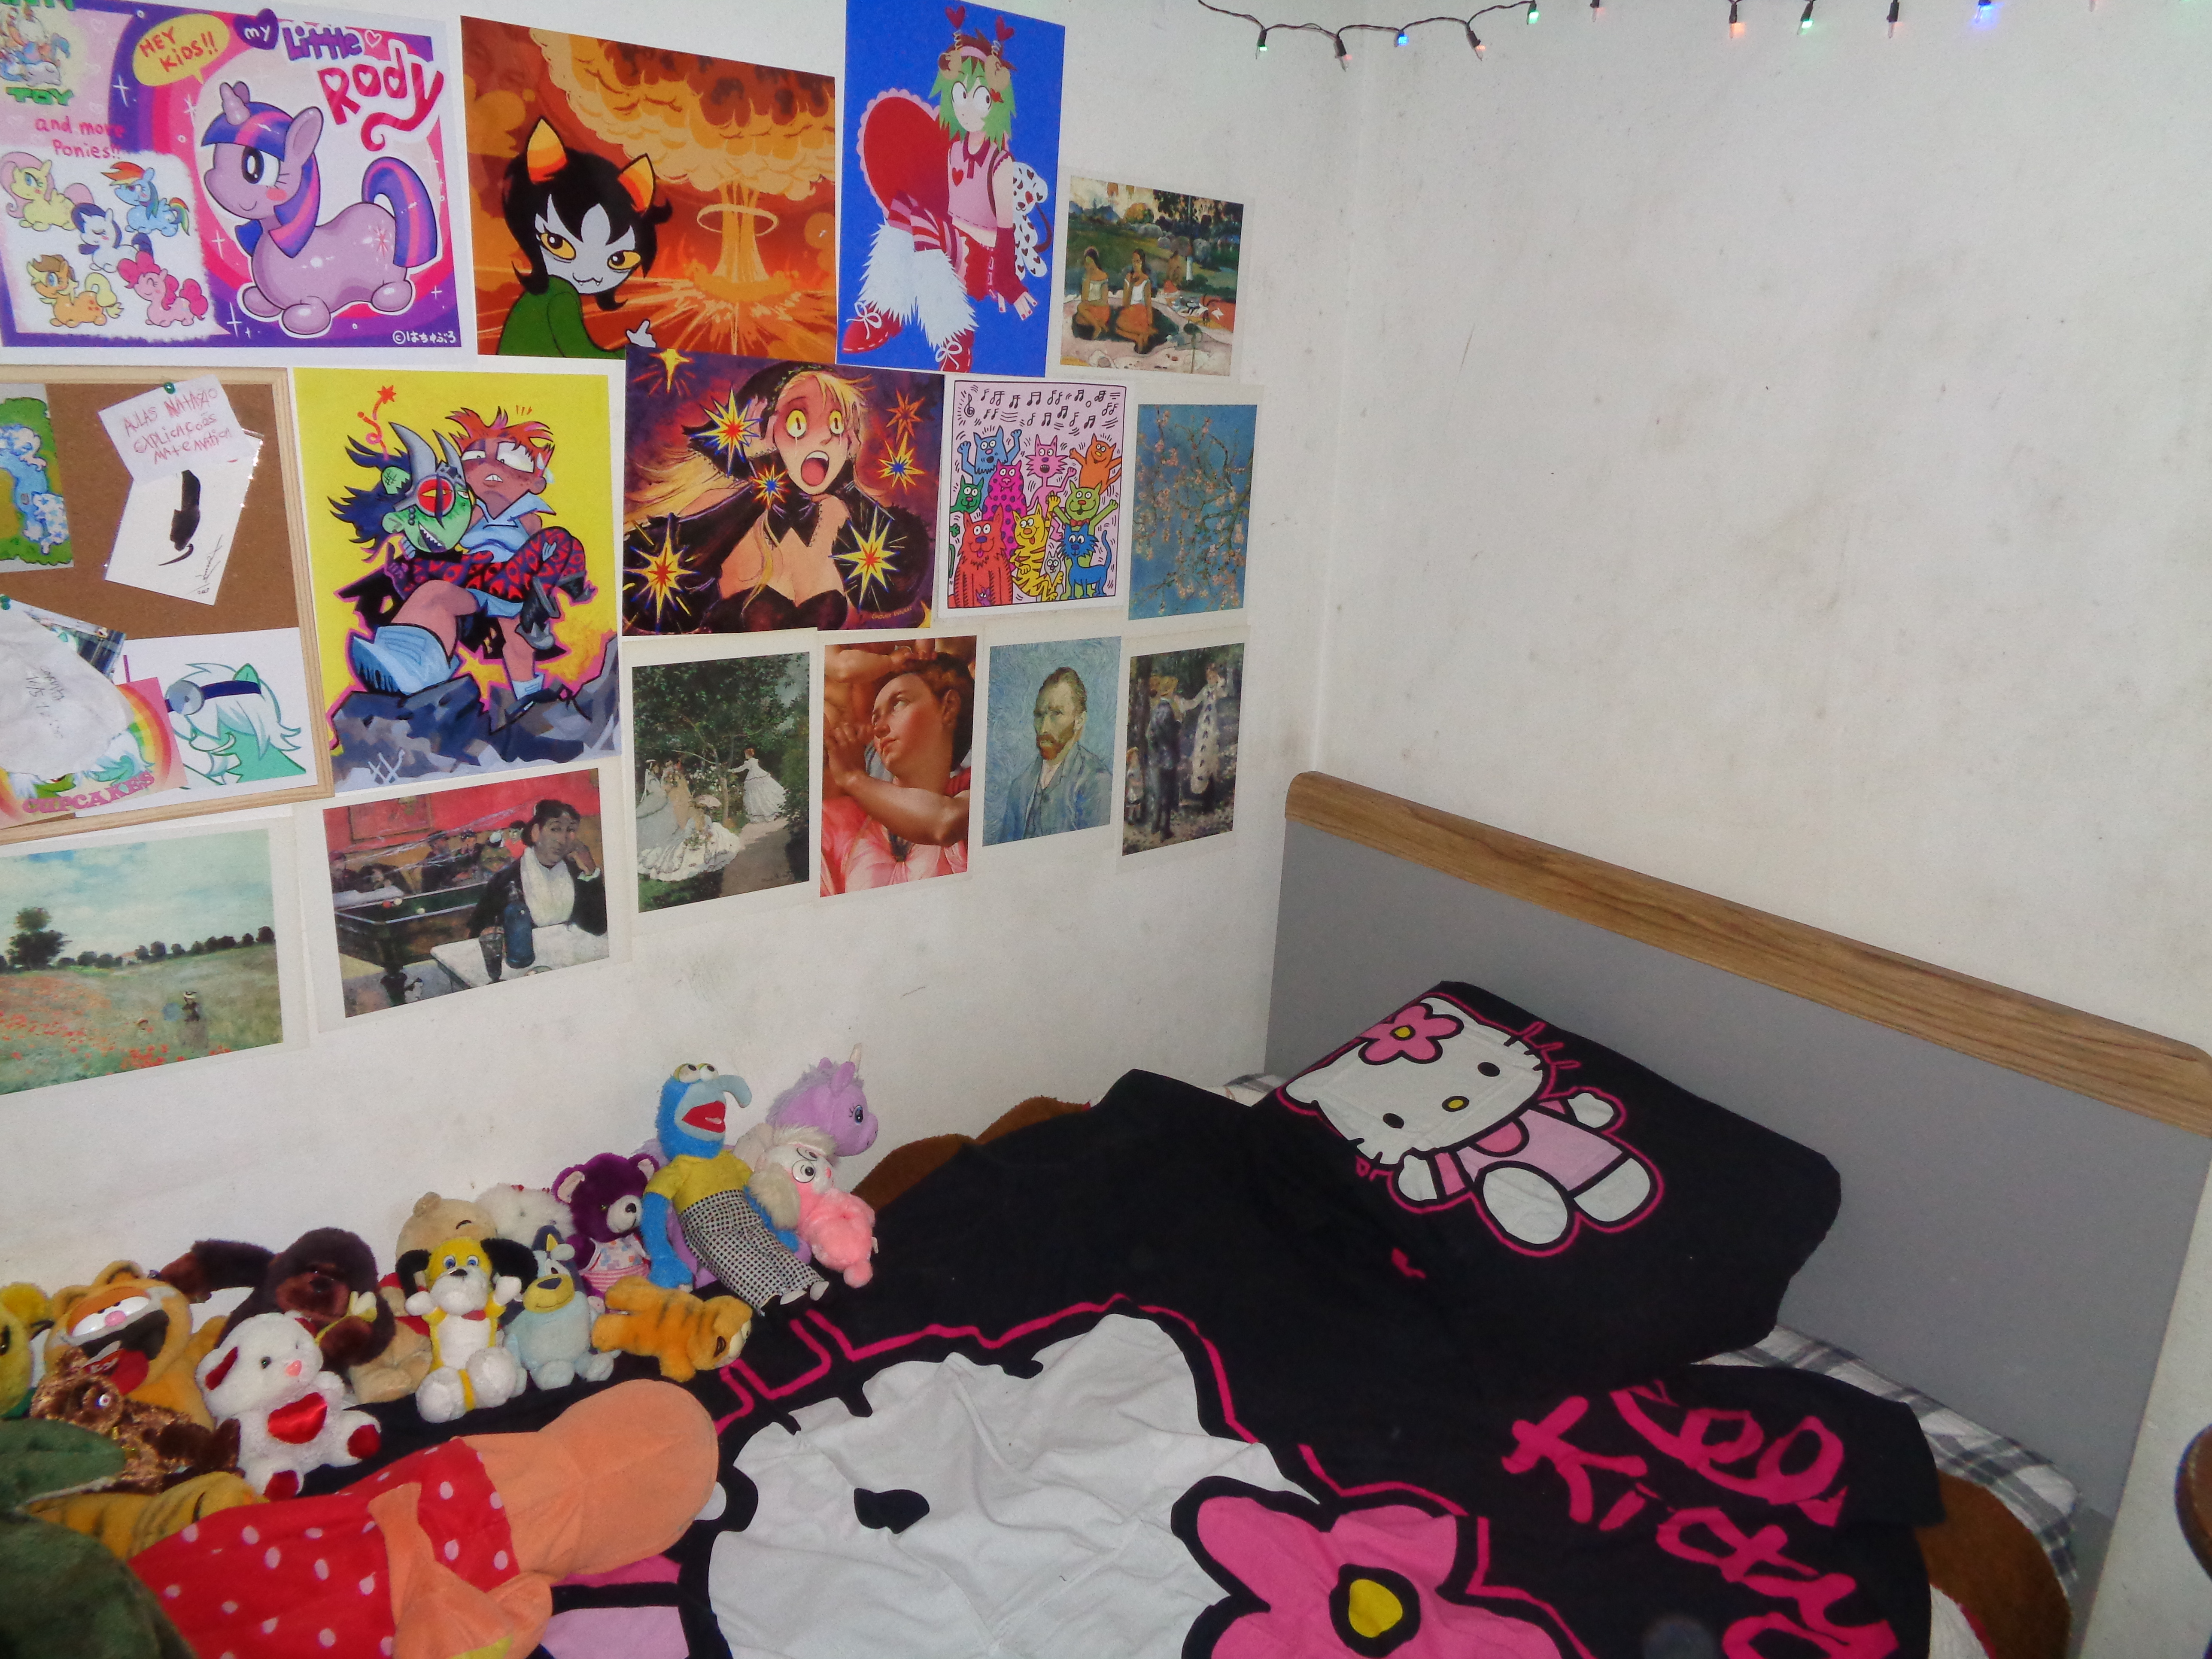 An image of the corner of a bedroom. the bed has hello kitty sheets and is covered in various plushies. above the bed are posters and prints from various artists and medias, such as homestuck, my little pony, dungeon meshi, and more. There are hung up christmas lights just visible in the frame.